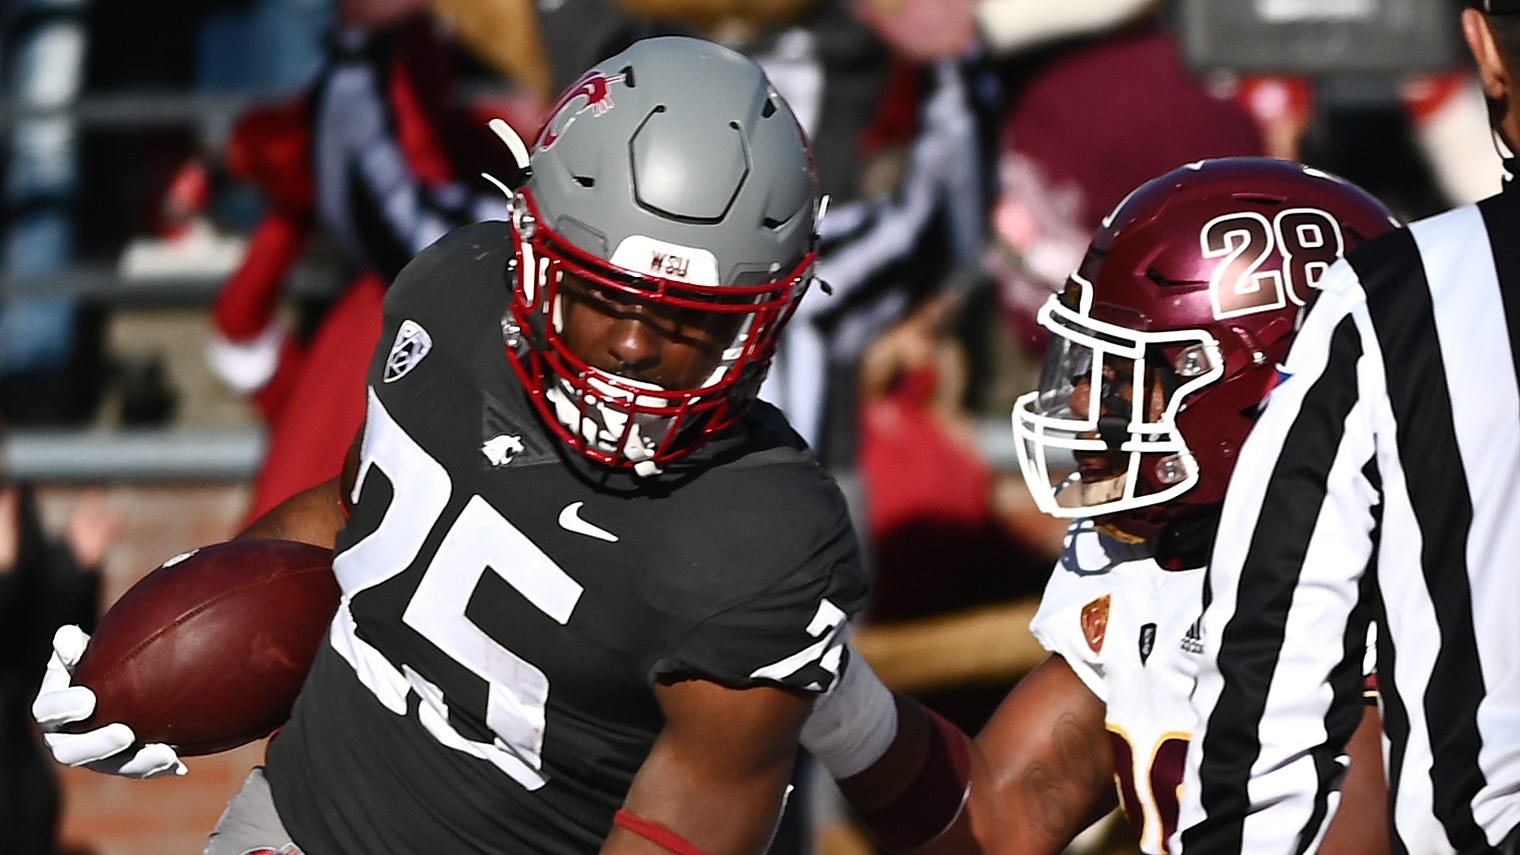  Arizona State football loses Pac-12 Conference game against Washington State 